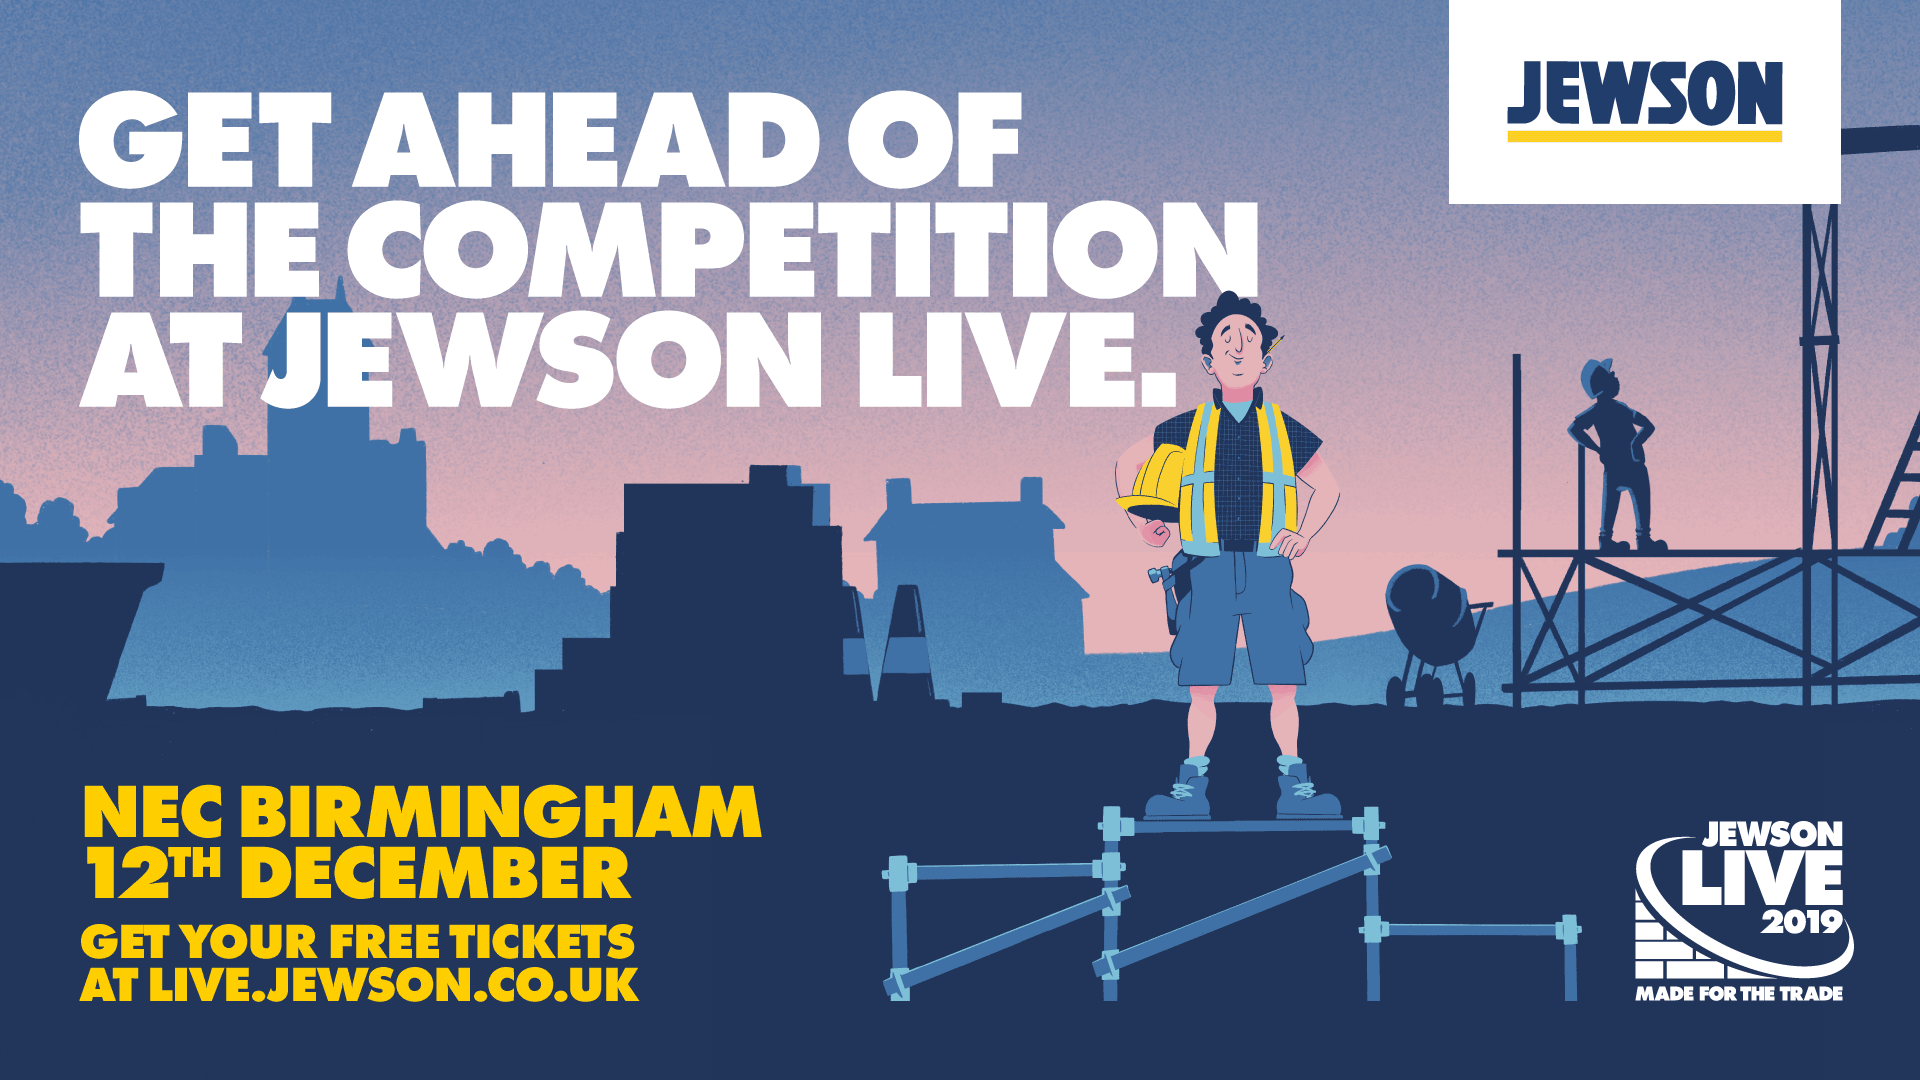 00034-63-Jewson-Live-2019-1920x1080px-Event-Photo.png